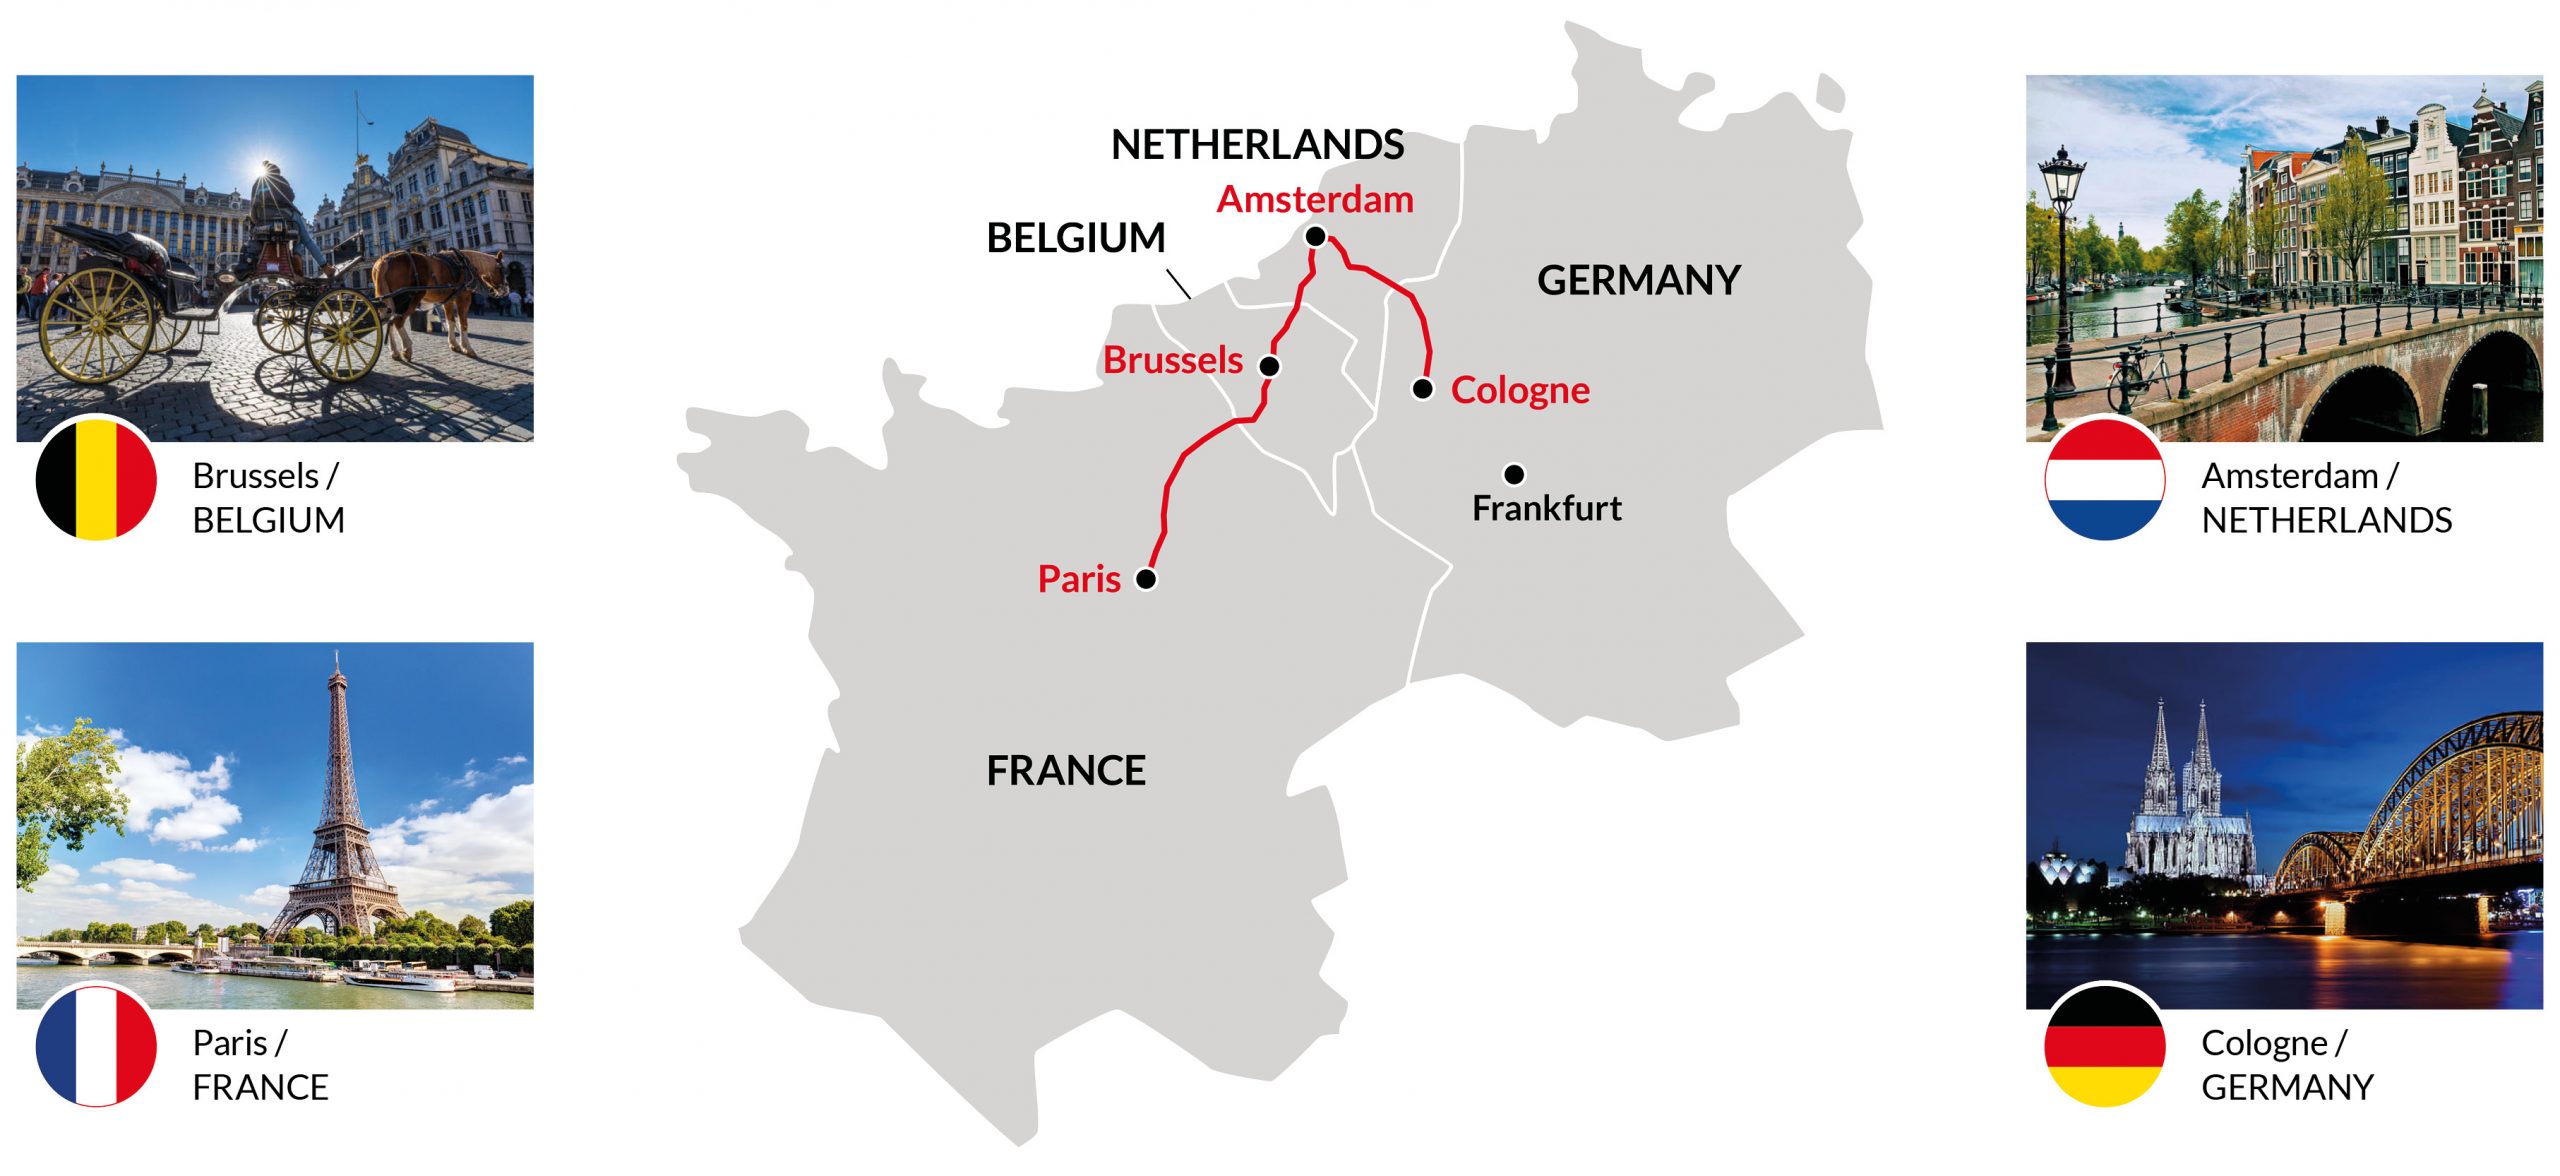 Roadshow_Map_routing_Western_Europe_Amsterdam